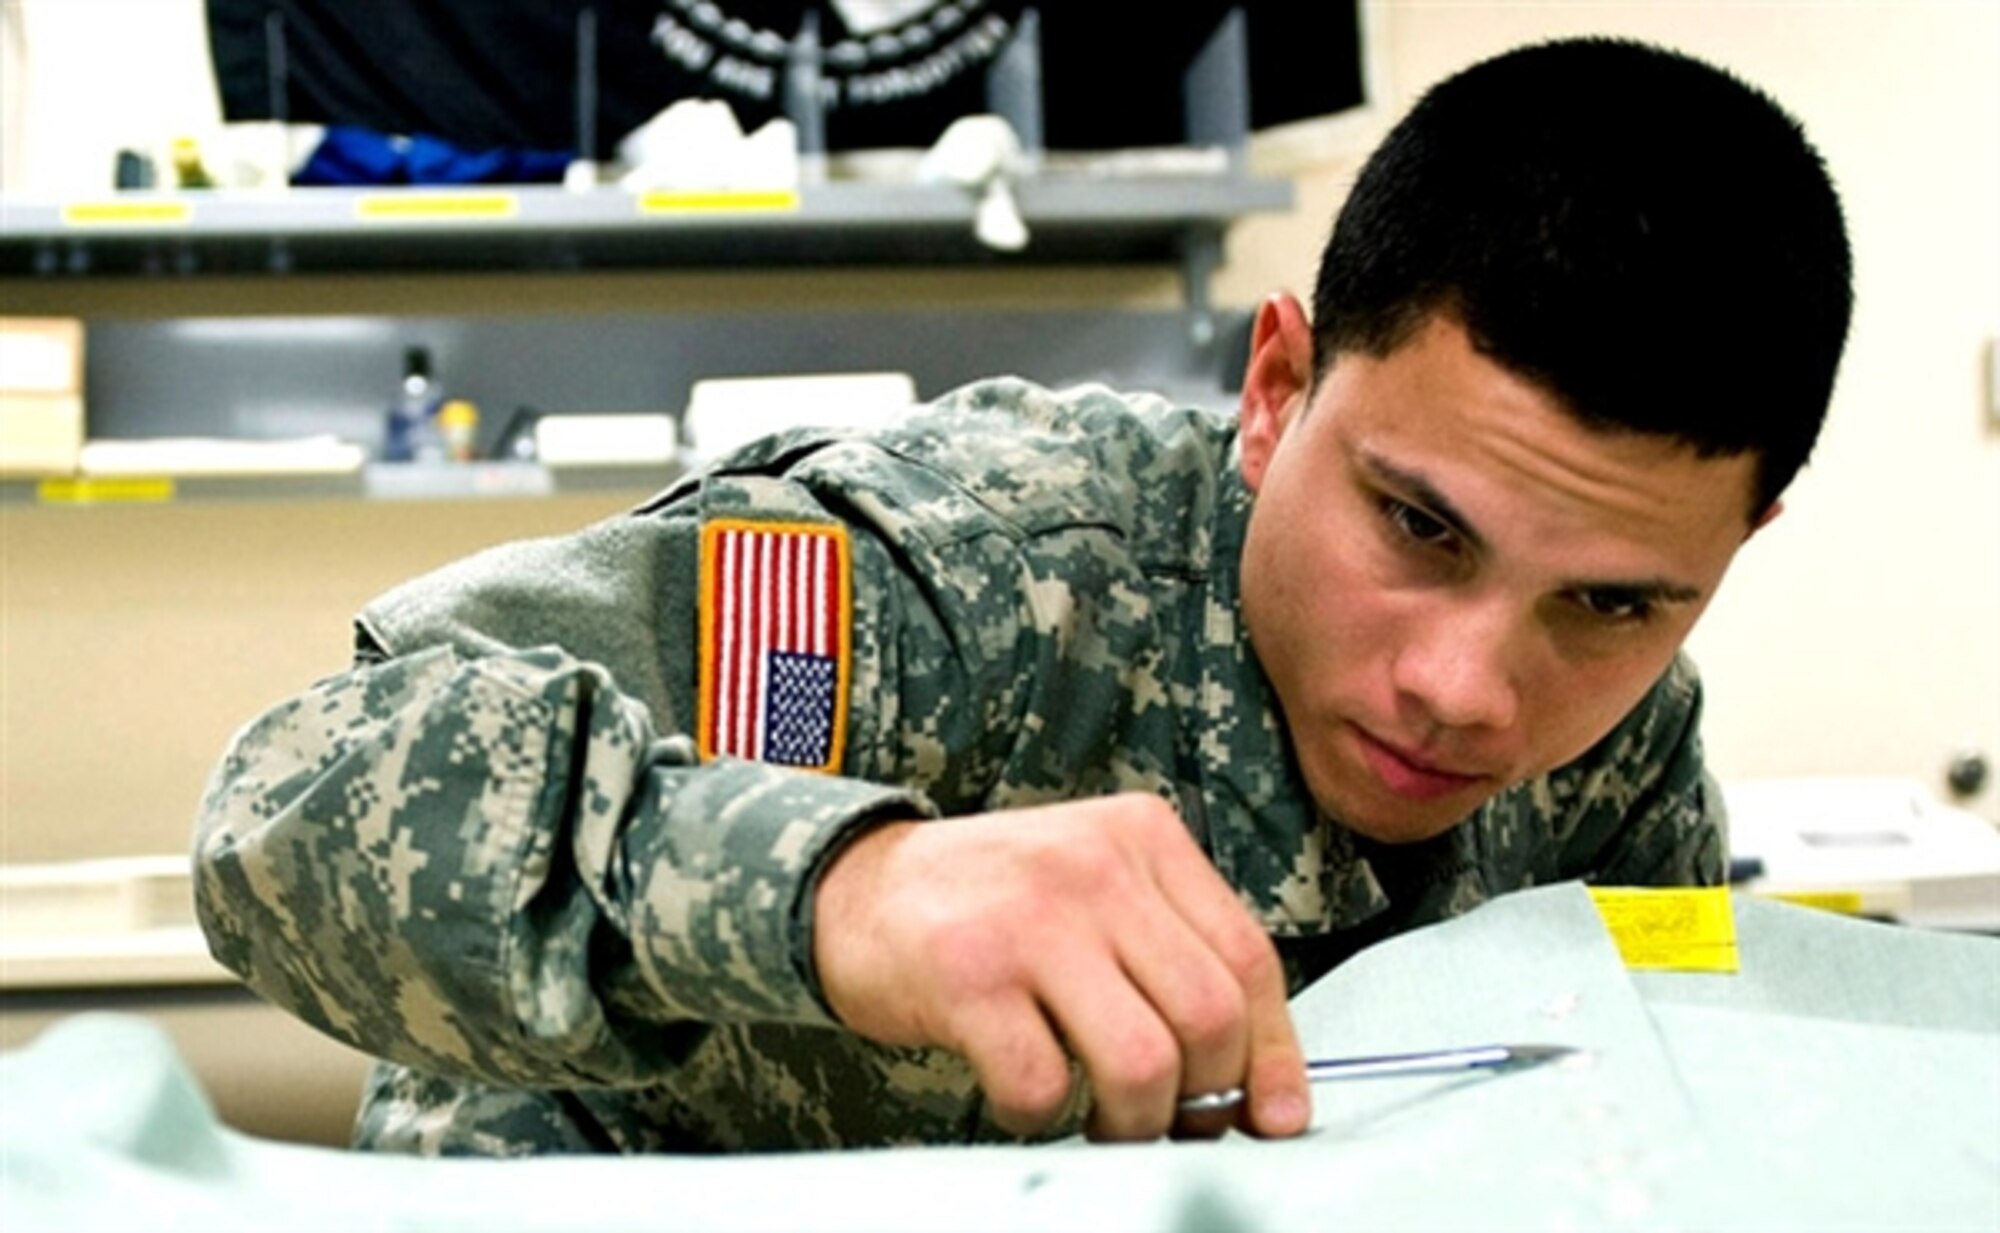 Army Spc. Xavier Gonzalez snips a thread off of a uniform shirt at the uniform shop of the Air Force Mortuary Affairs Operations Center at Dover Air Force Base, Del. Gonzalez prepares uniforms for fallen Soldiers’ remains. (U.S. Air Force photo)  
